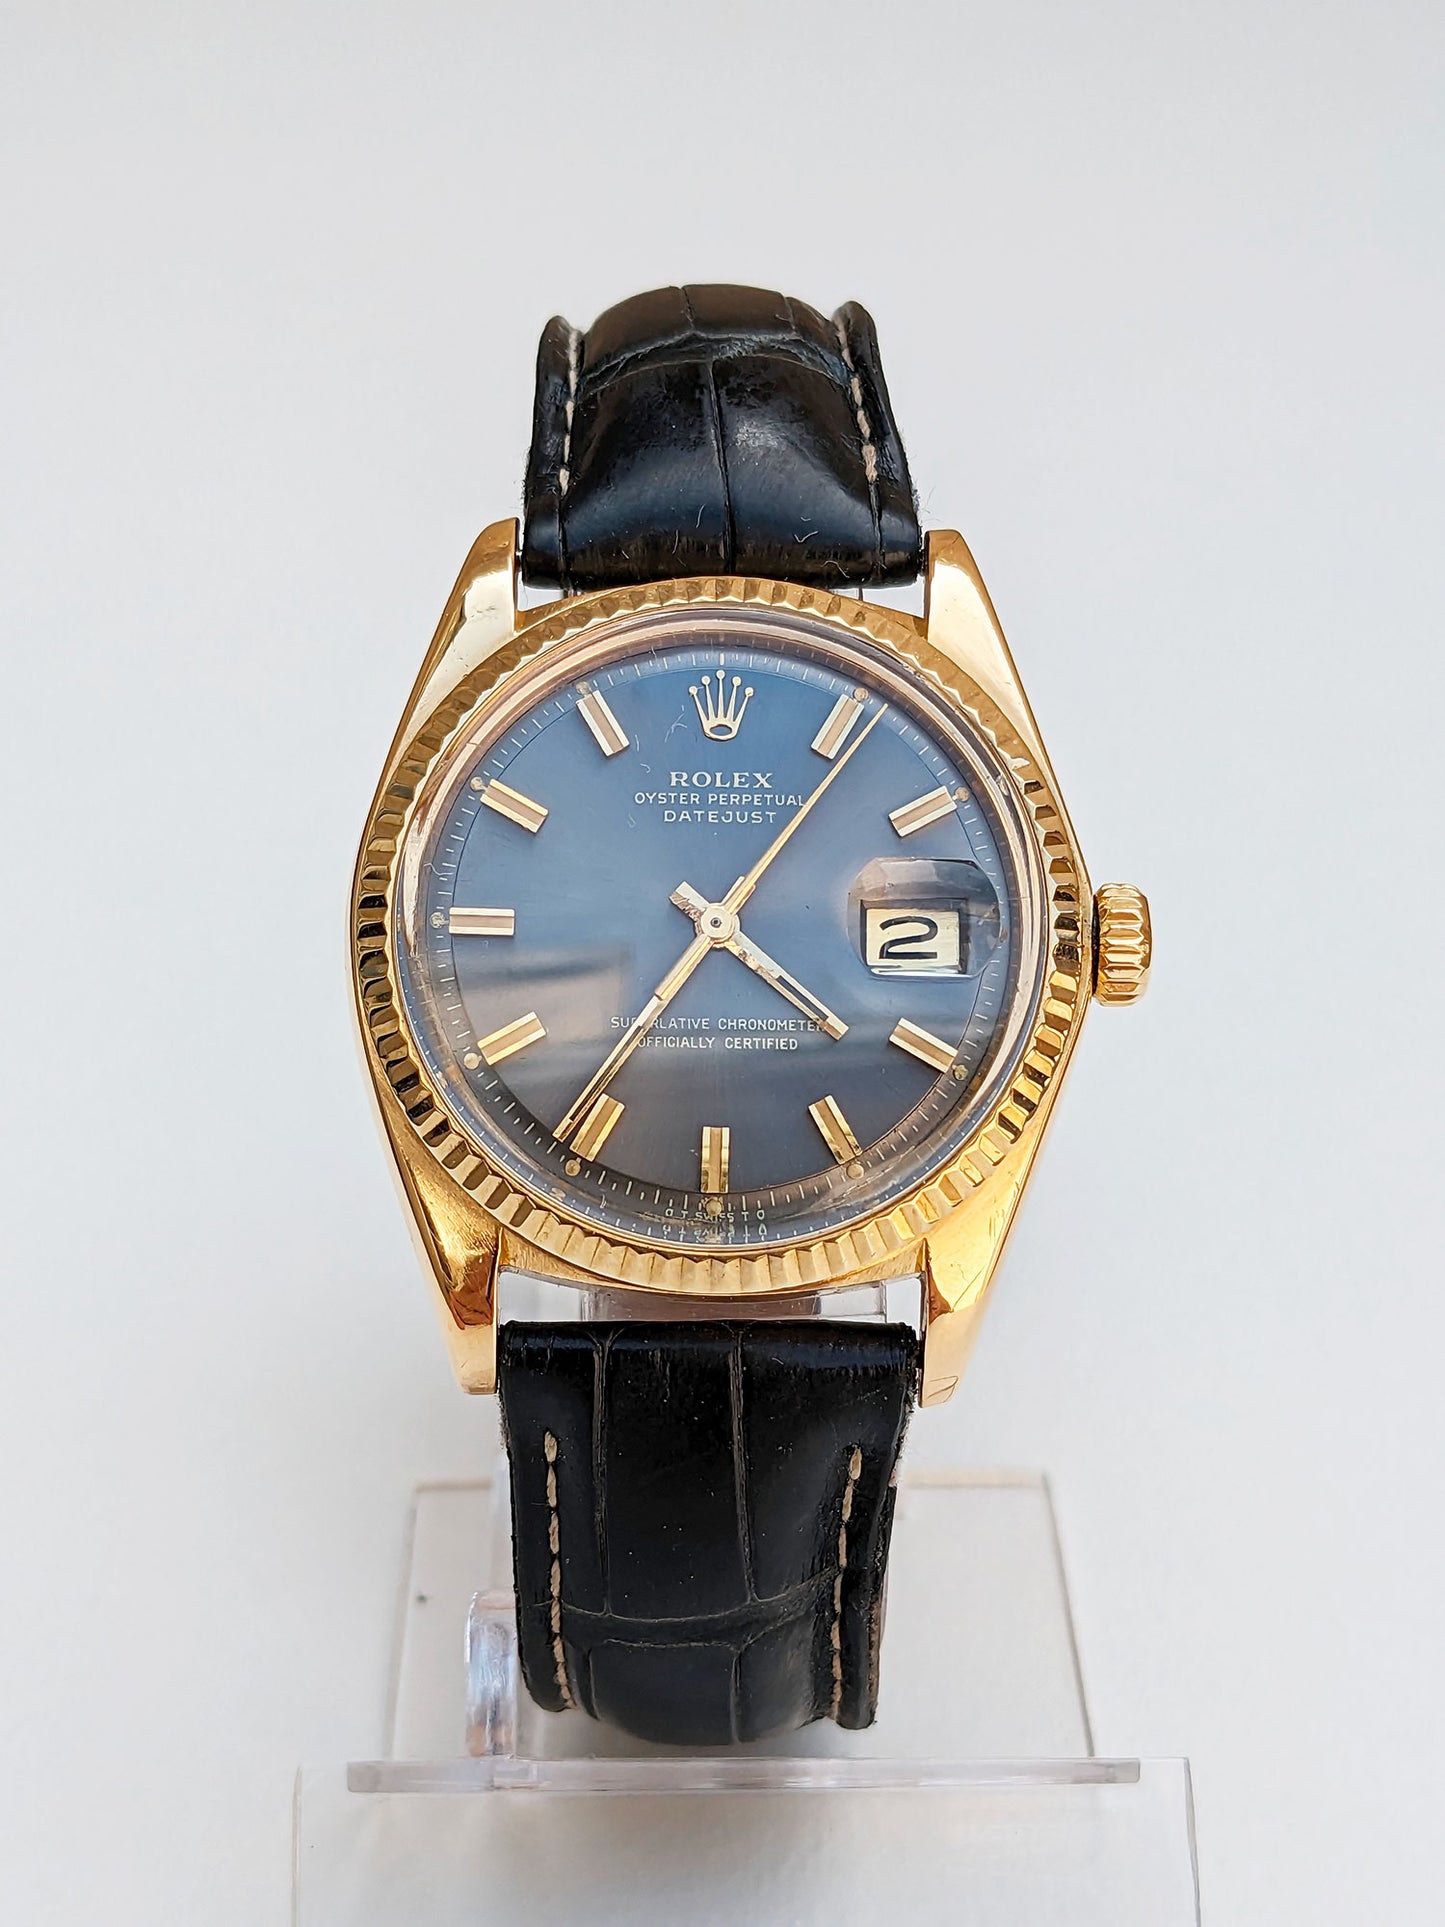 Rolex Oyster Perpetual Datejust Yellow Gold (circa 1980)